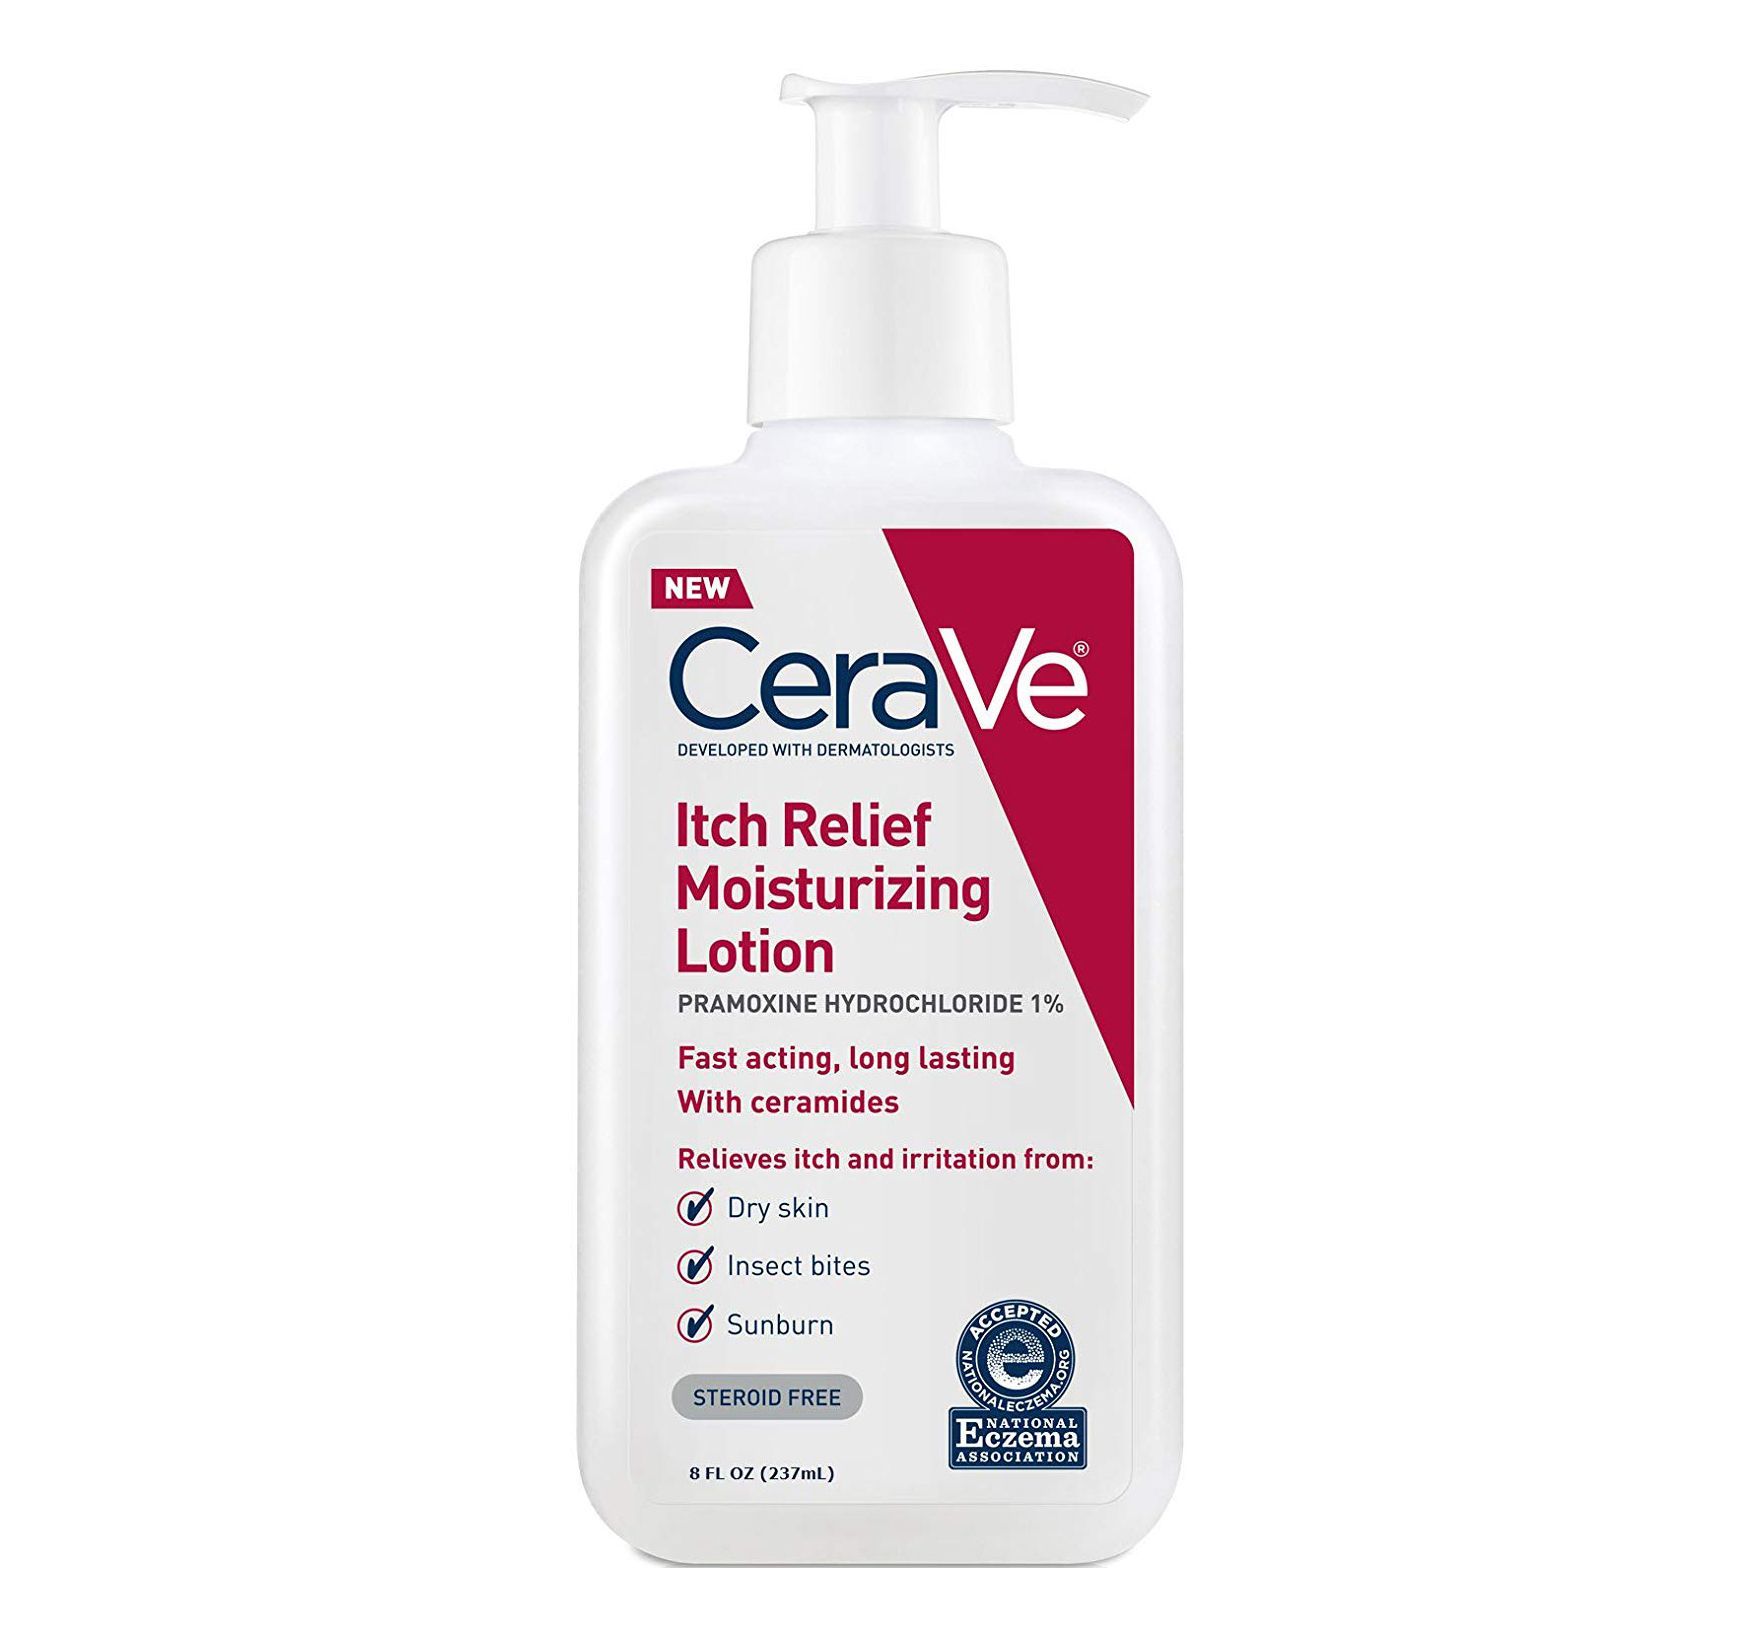 CeraVe Itch Relief Moisturizing Lotion